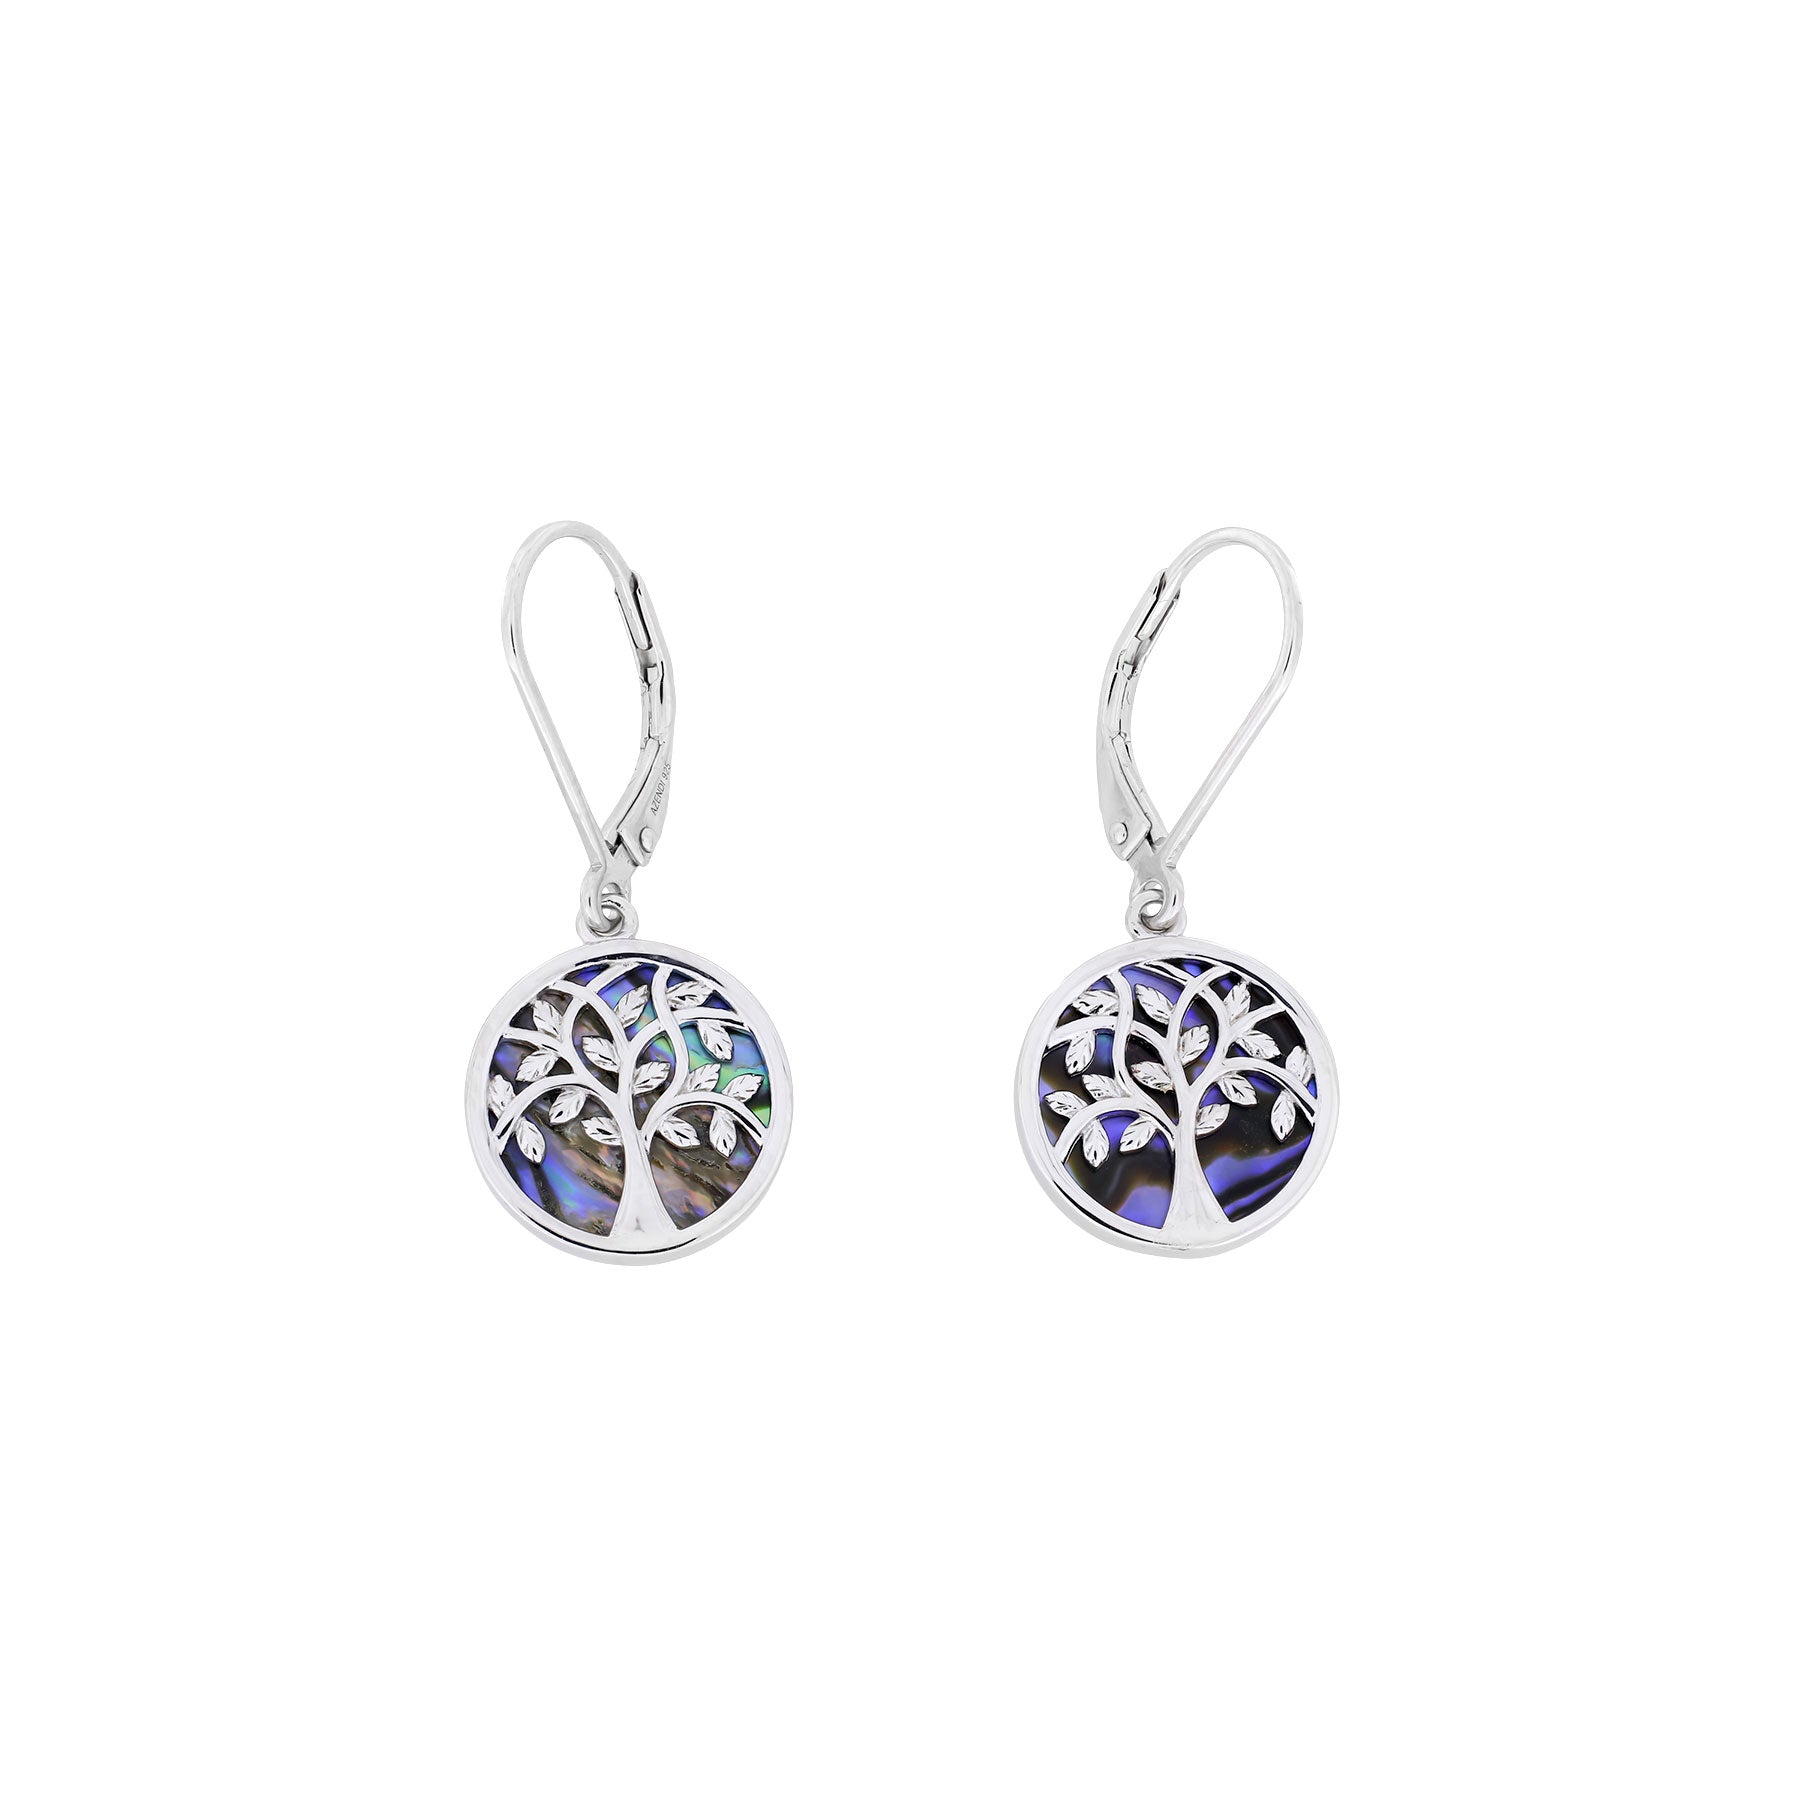 Arbor Vitae Drop Earrings with Abalone